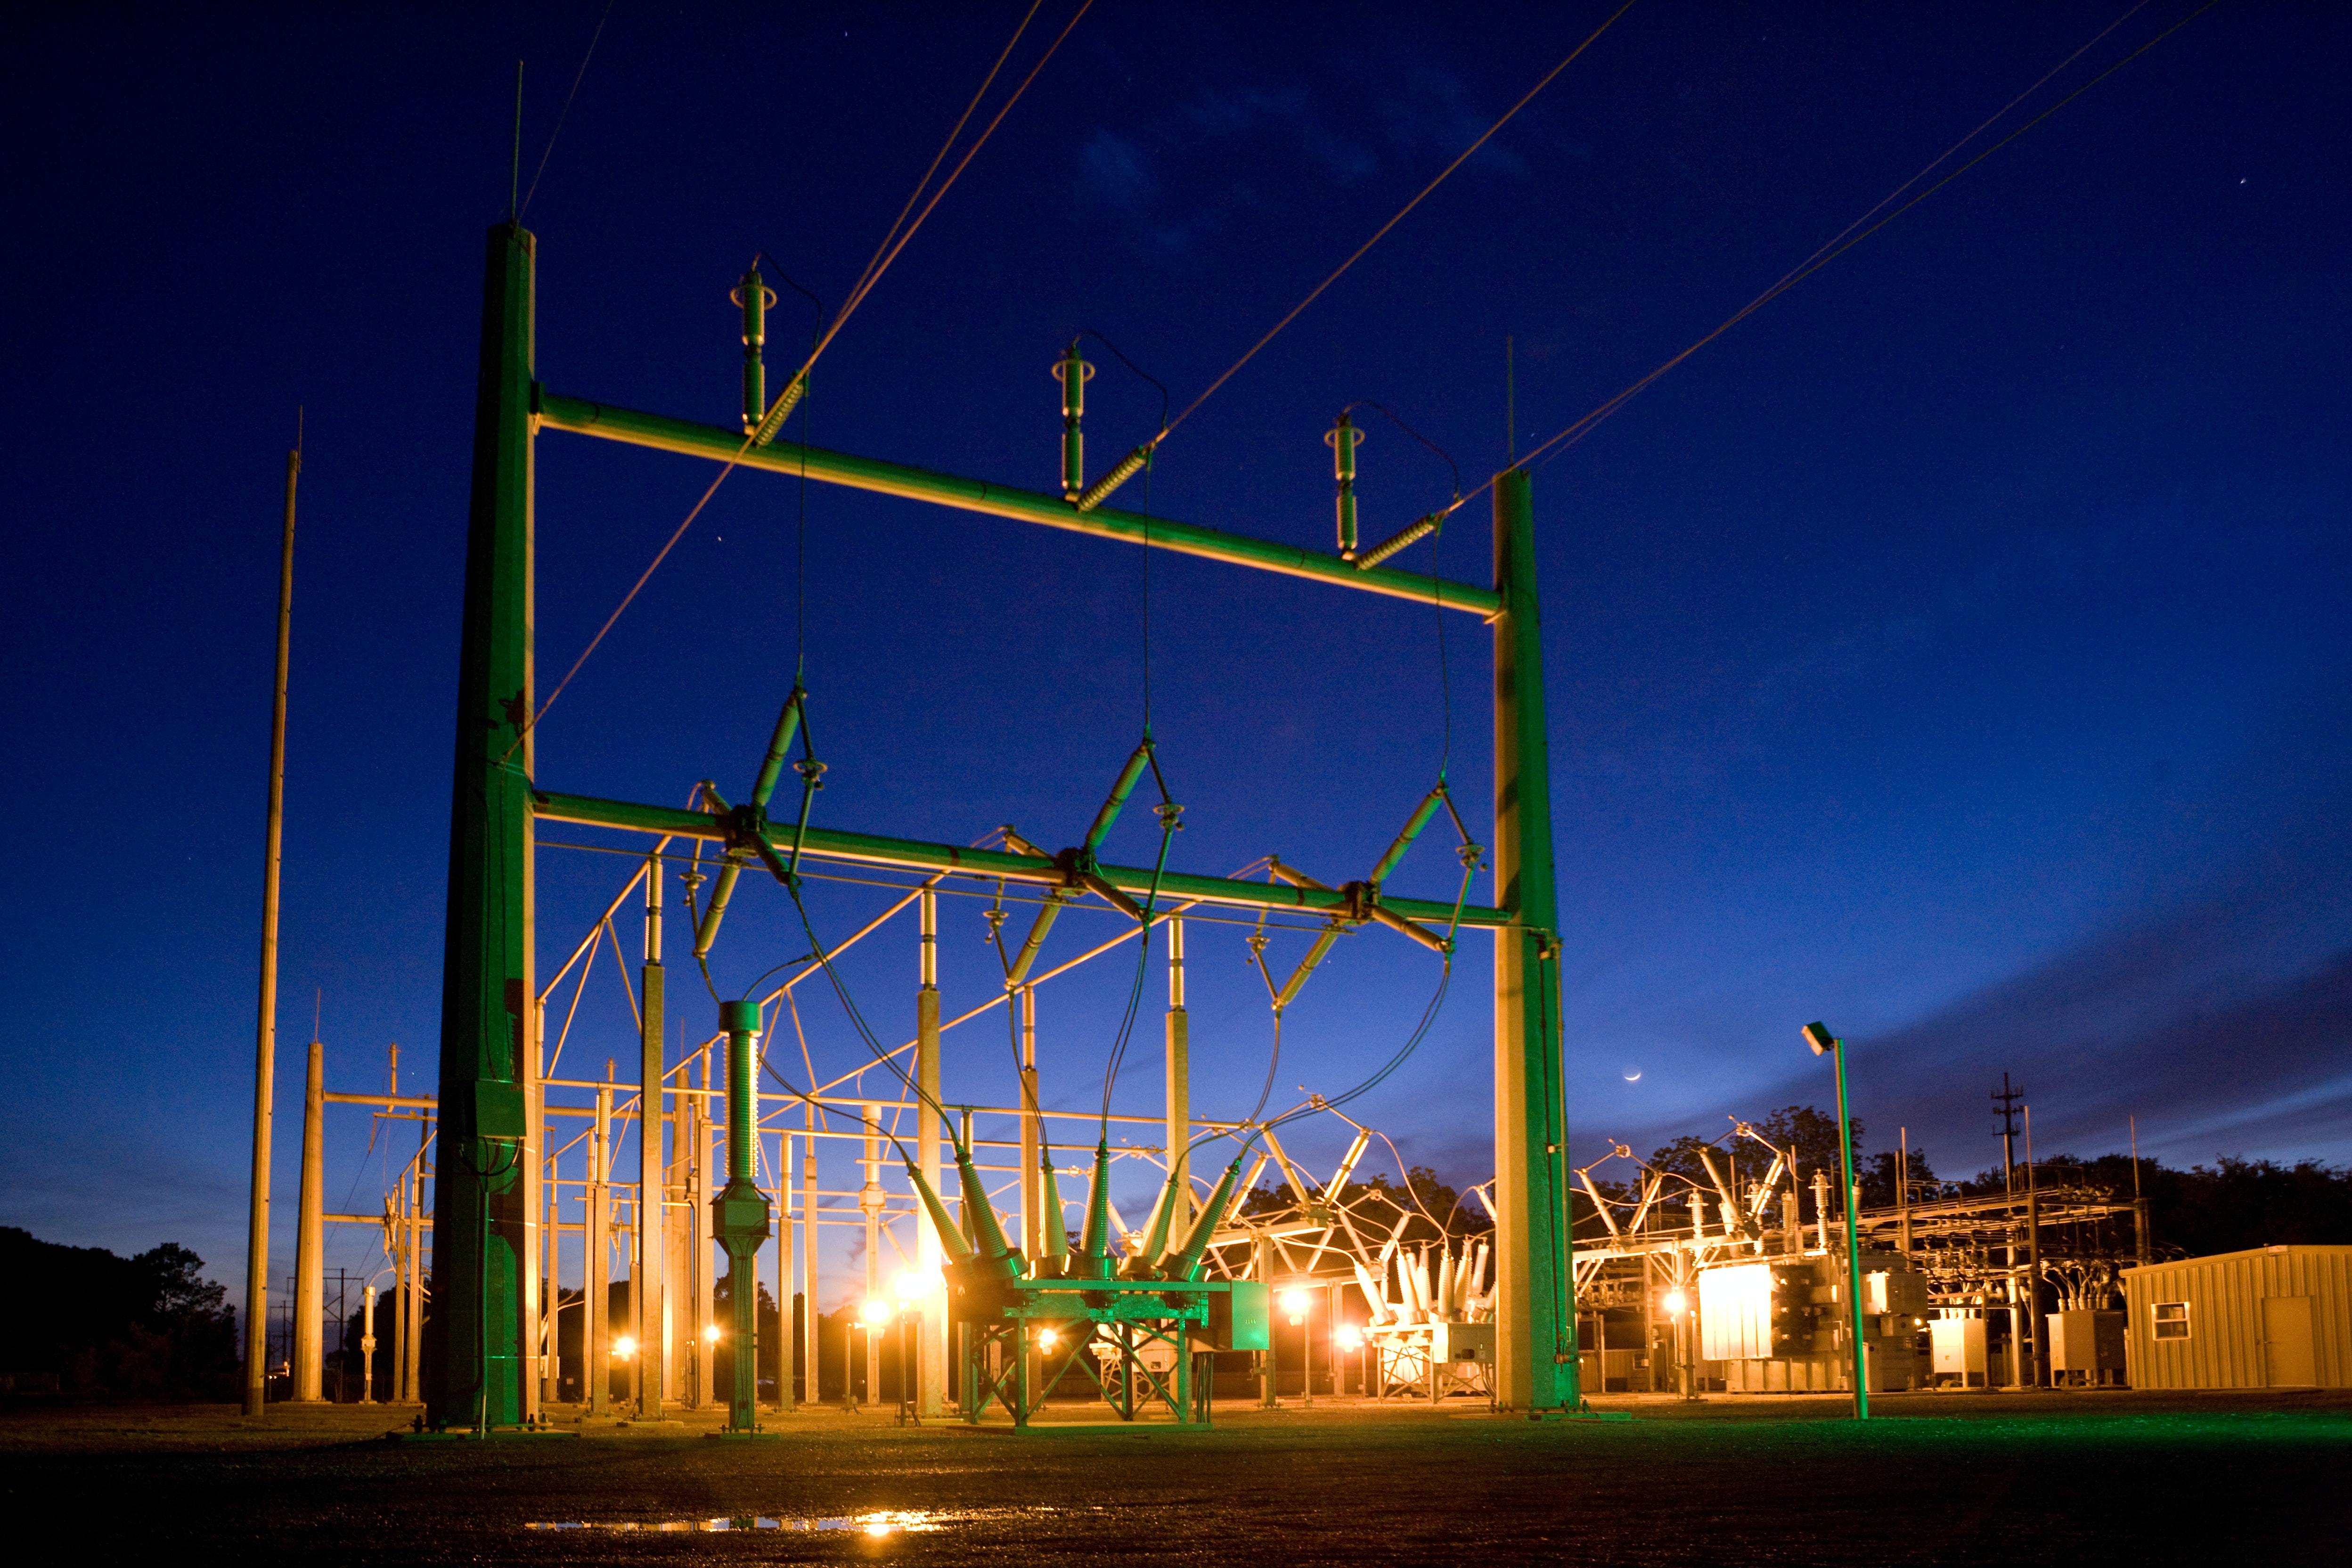 Substation Structures